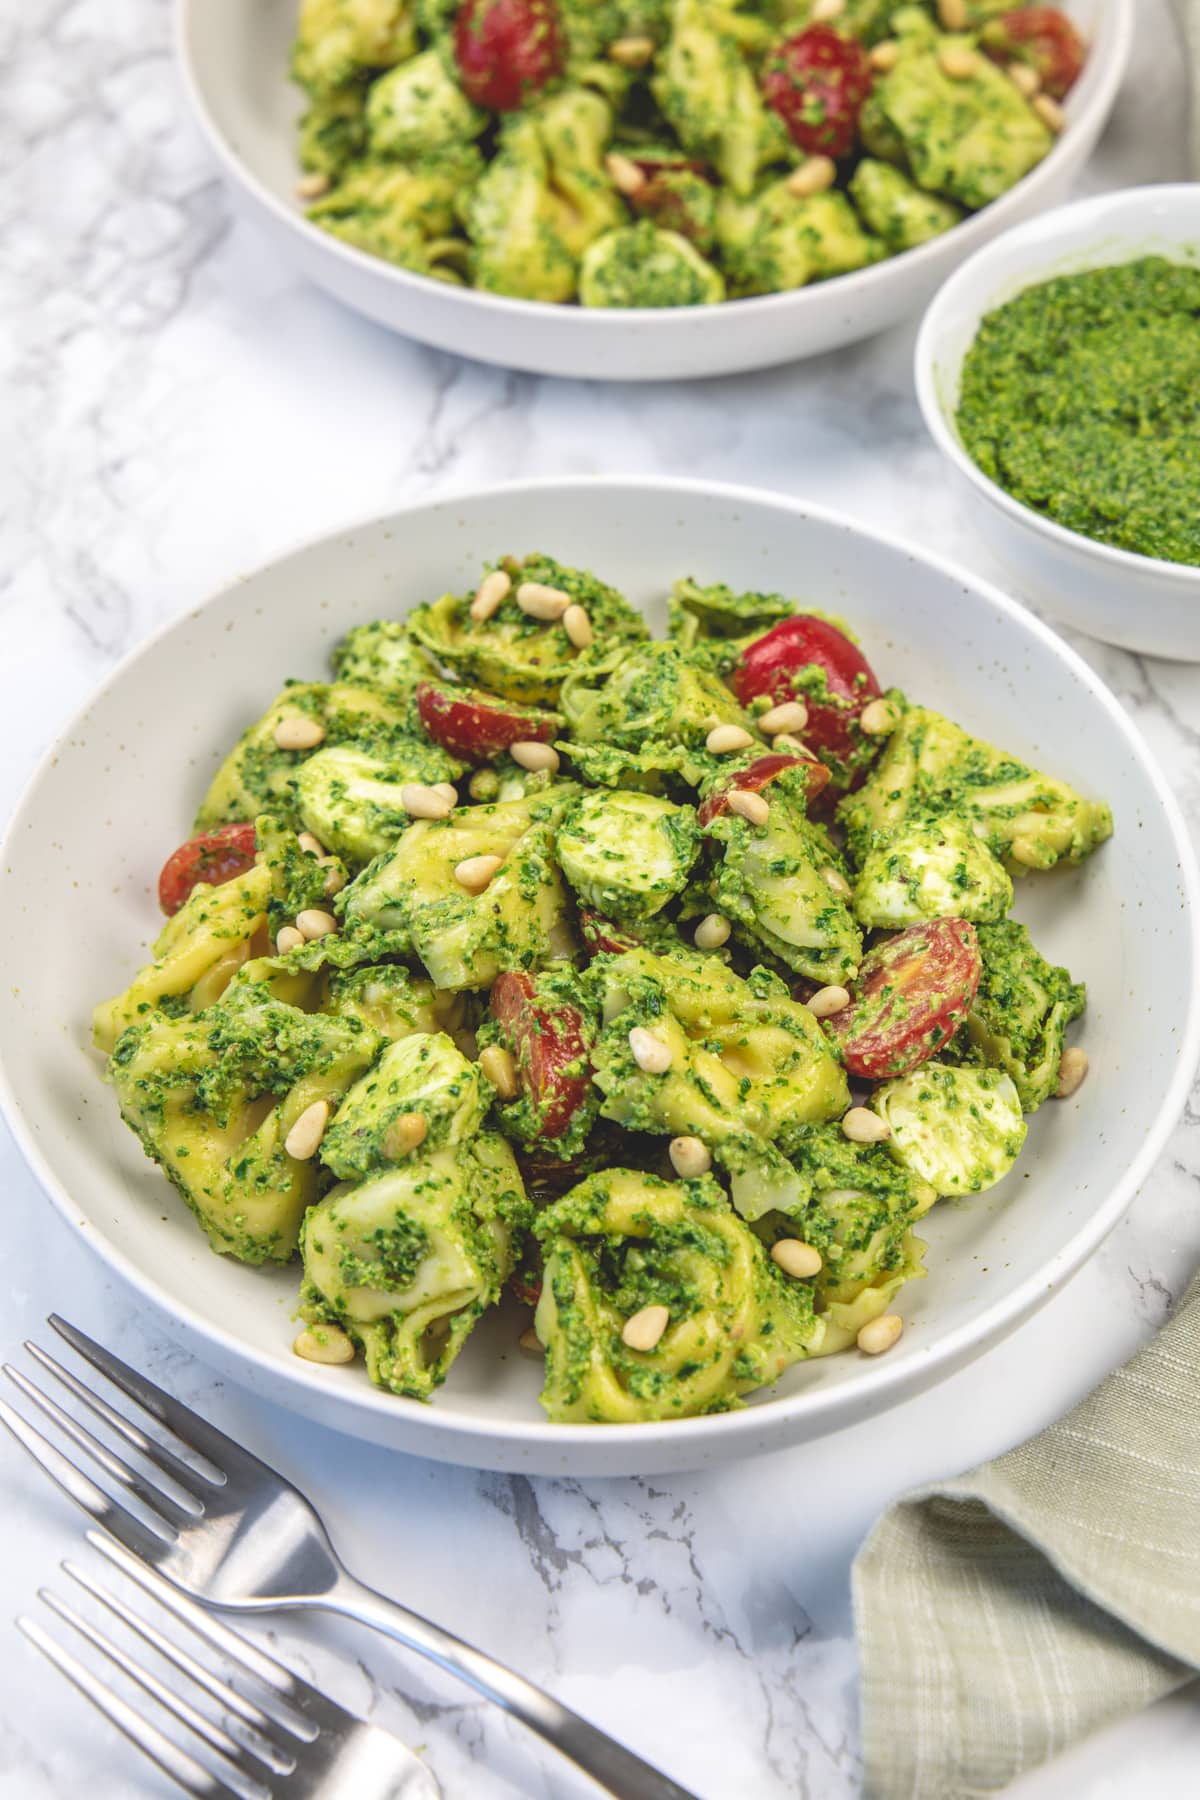 Pesto tortellini salad in two plates with forks on left and a bowl of extra pesto on right.